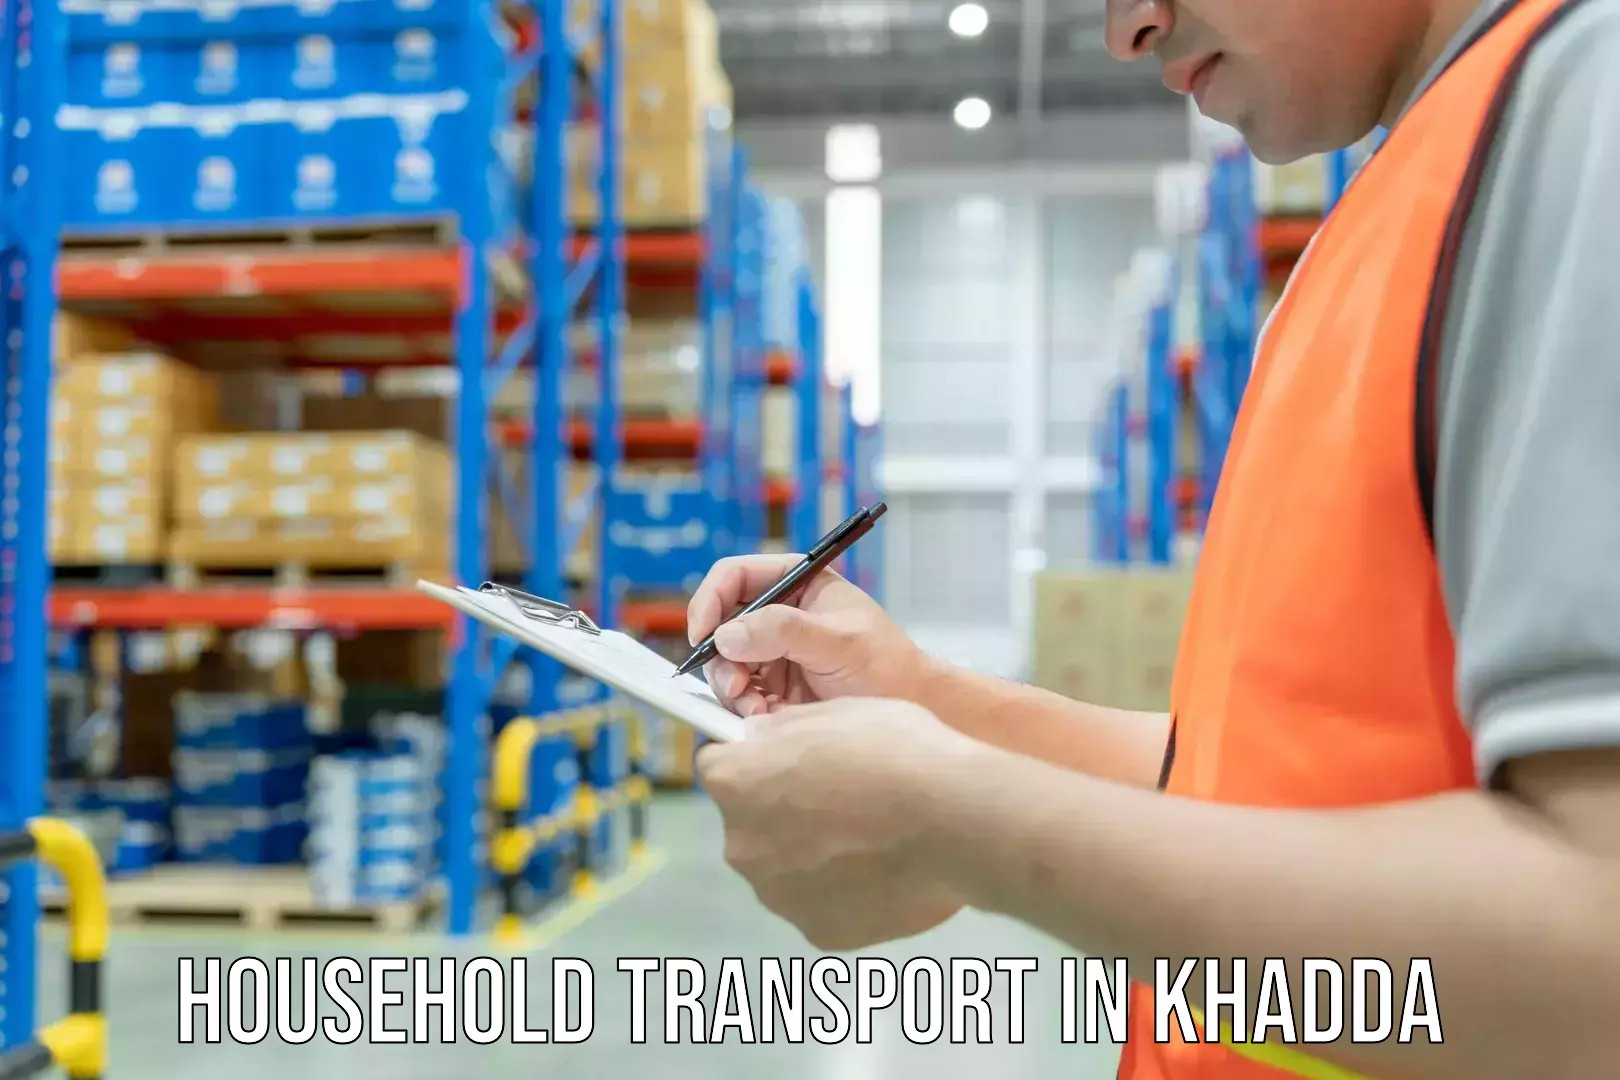 Quality relocation services in Khadda